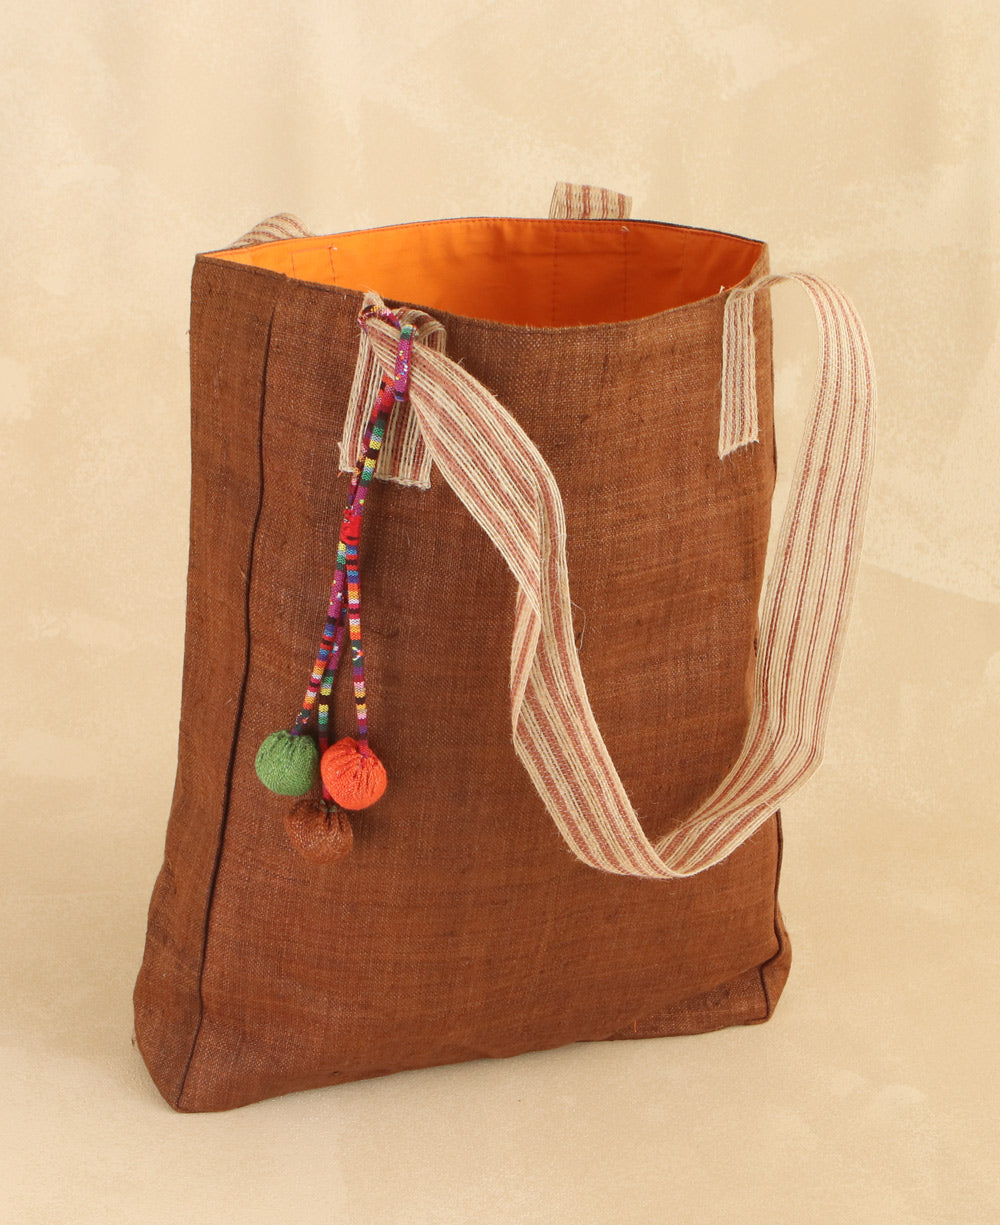 Jute bag with window and rope handles (58.06.53) - Art From Italy